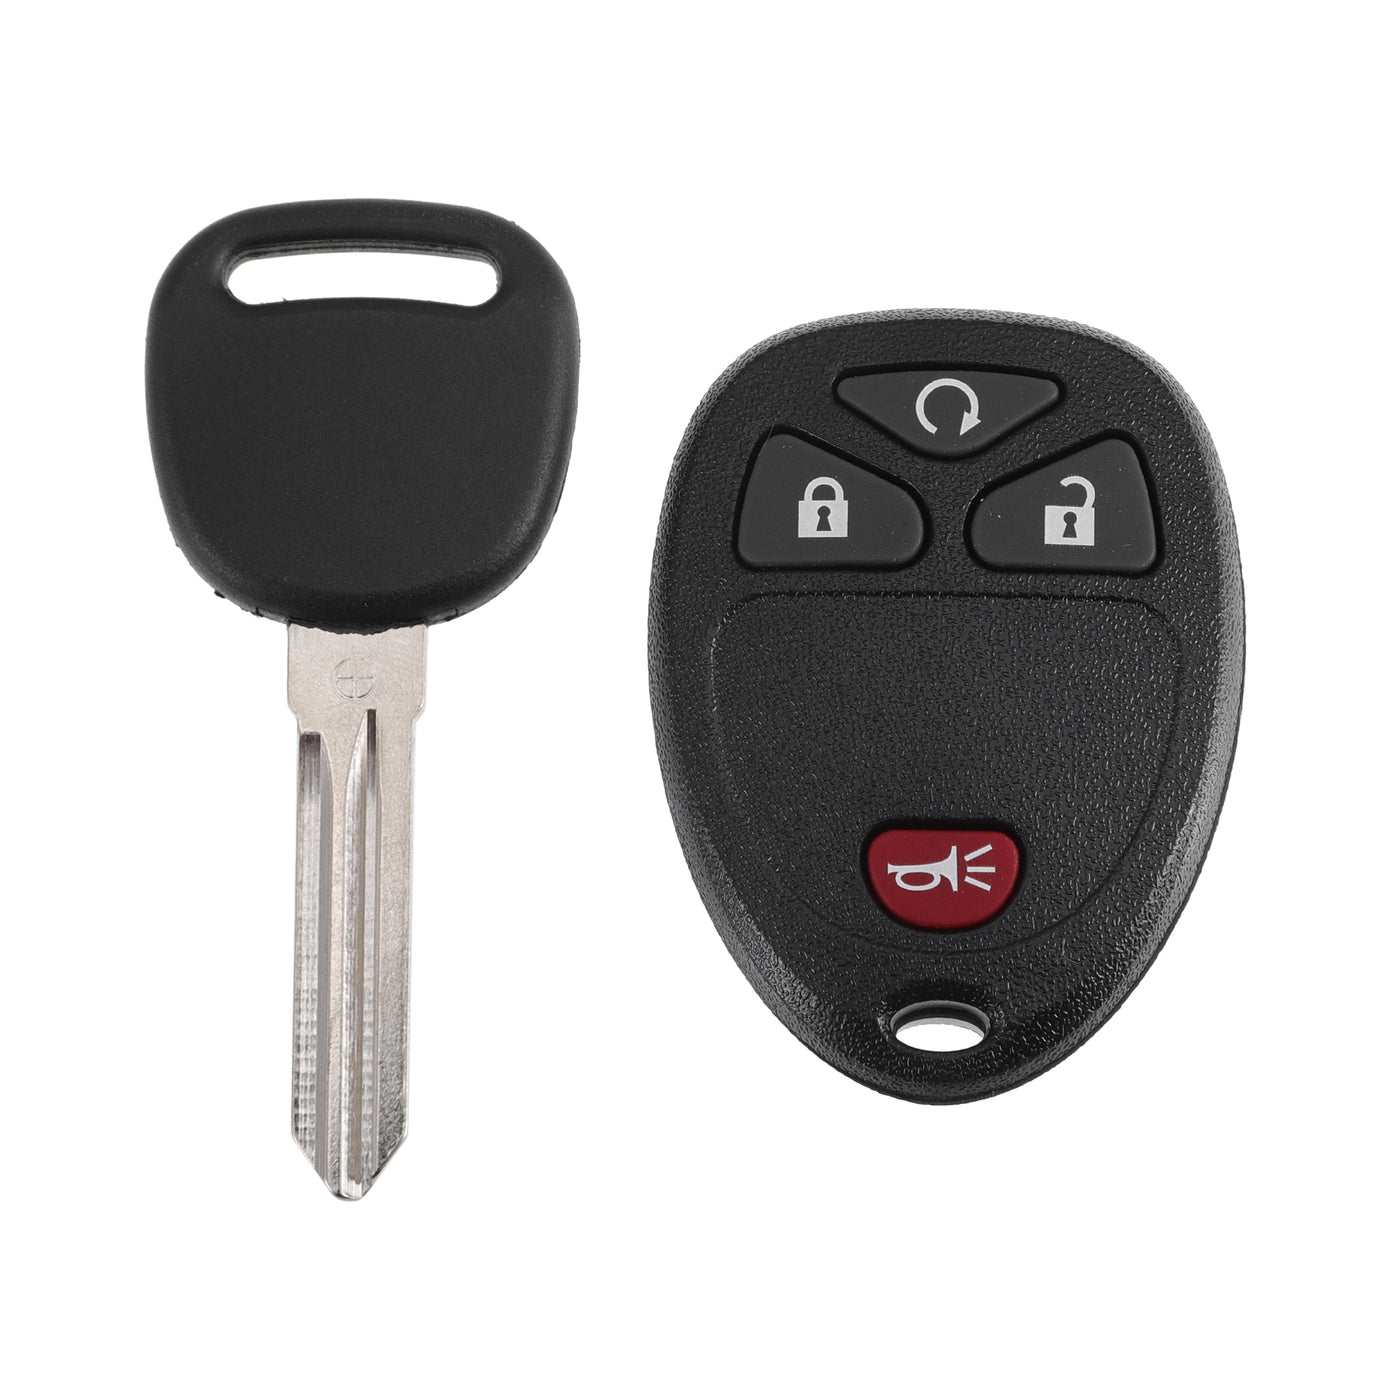 X AUTOHAUX KOBGT04A 315MHz Keyless Entry Remote Ignition Transponder Key Fob for Chevrolet Uplander 2005-2008 for Chevrolet HHR 2006-2011 for Buick Terraza 2005-2007 4 Buttons